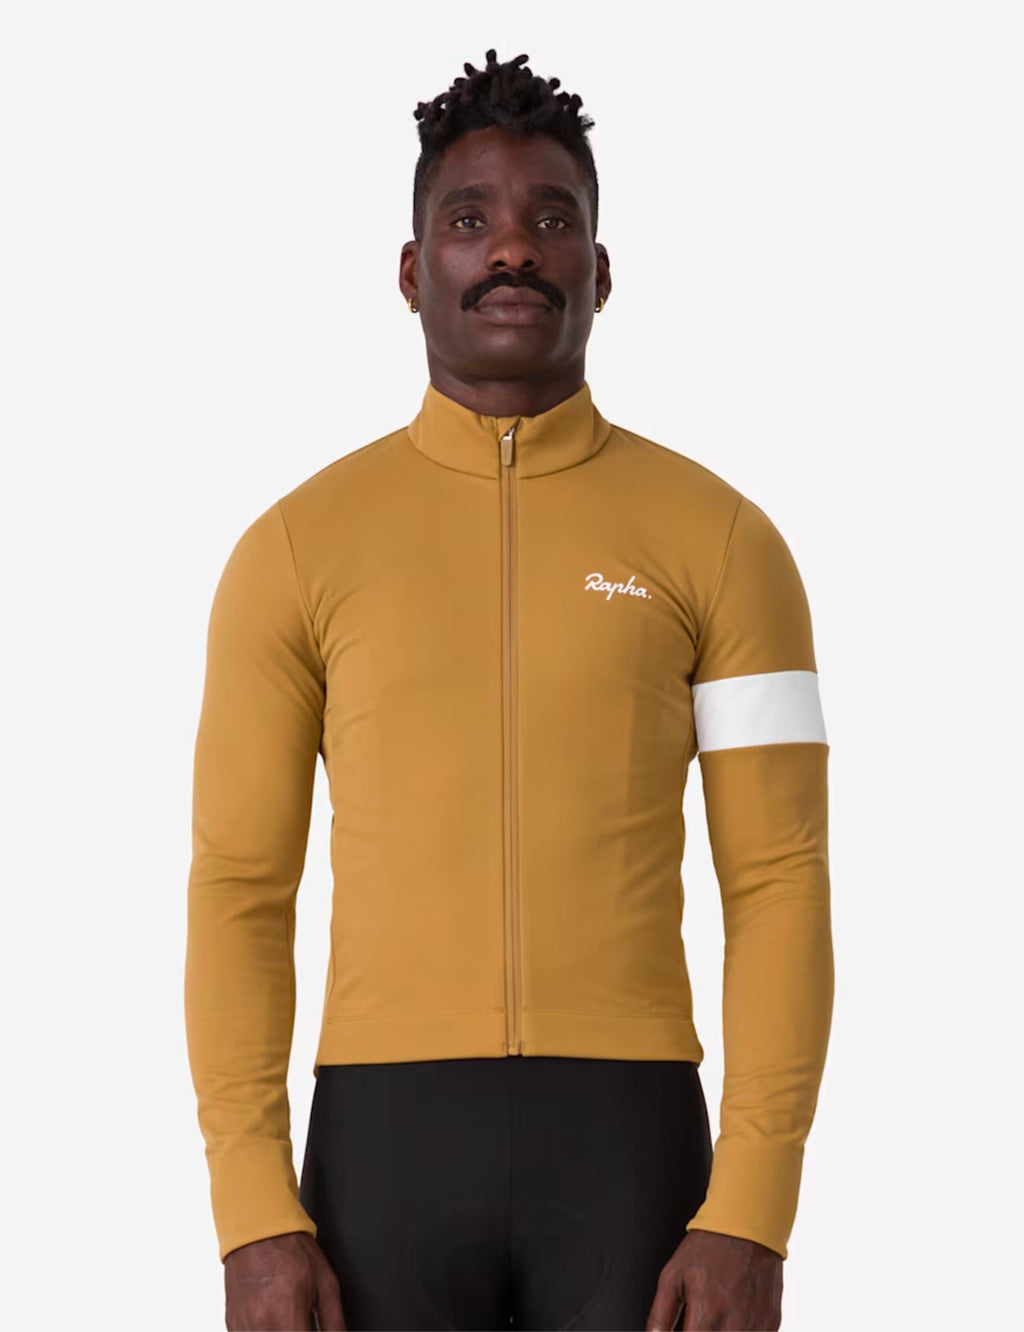 Rapha Men's Core Winter Jacket - Faded Gold/White | Article.